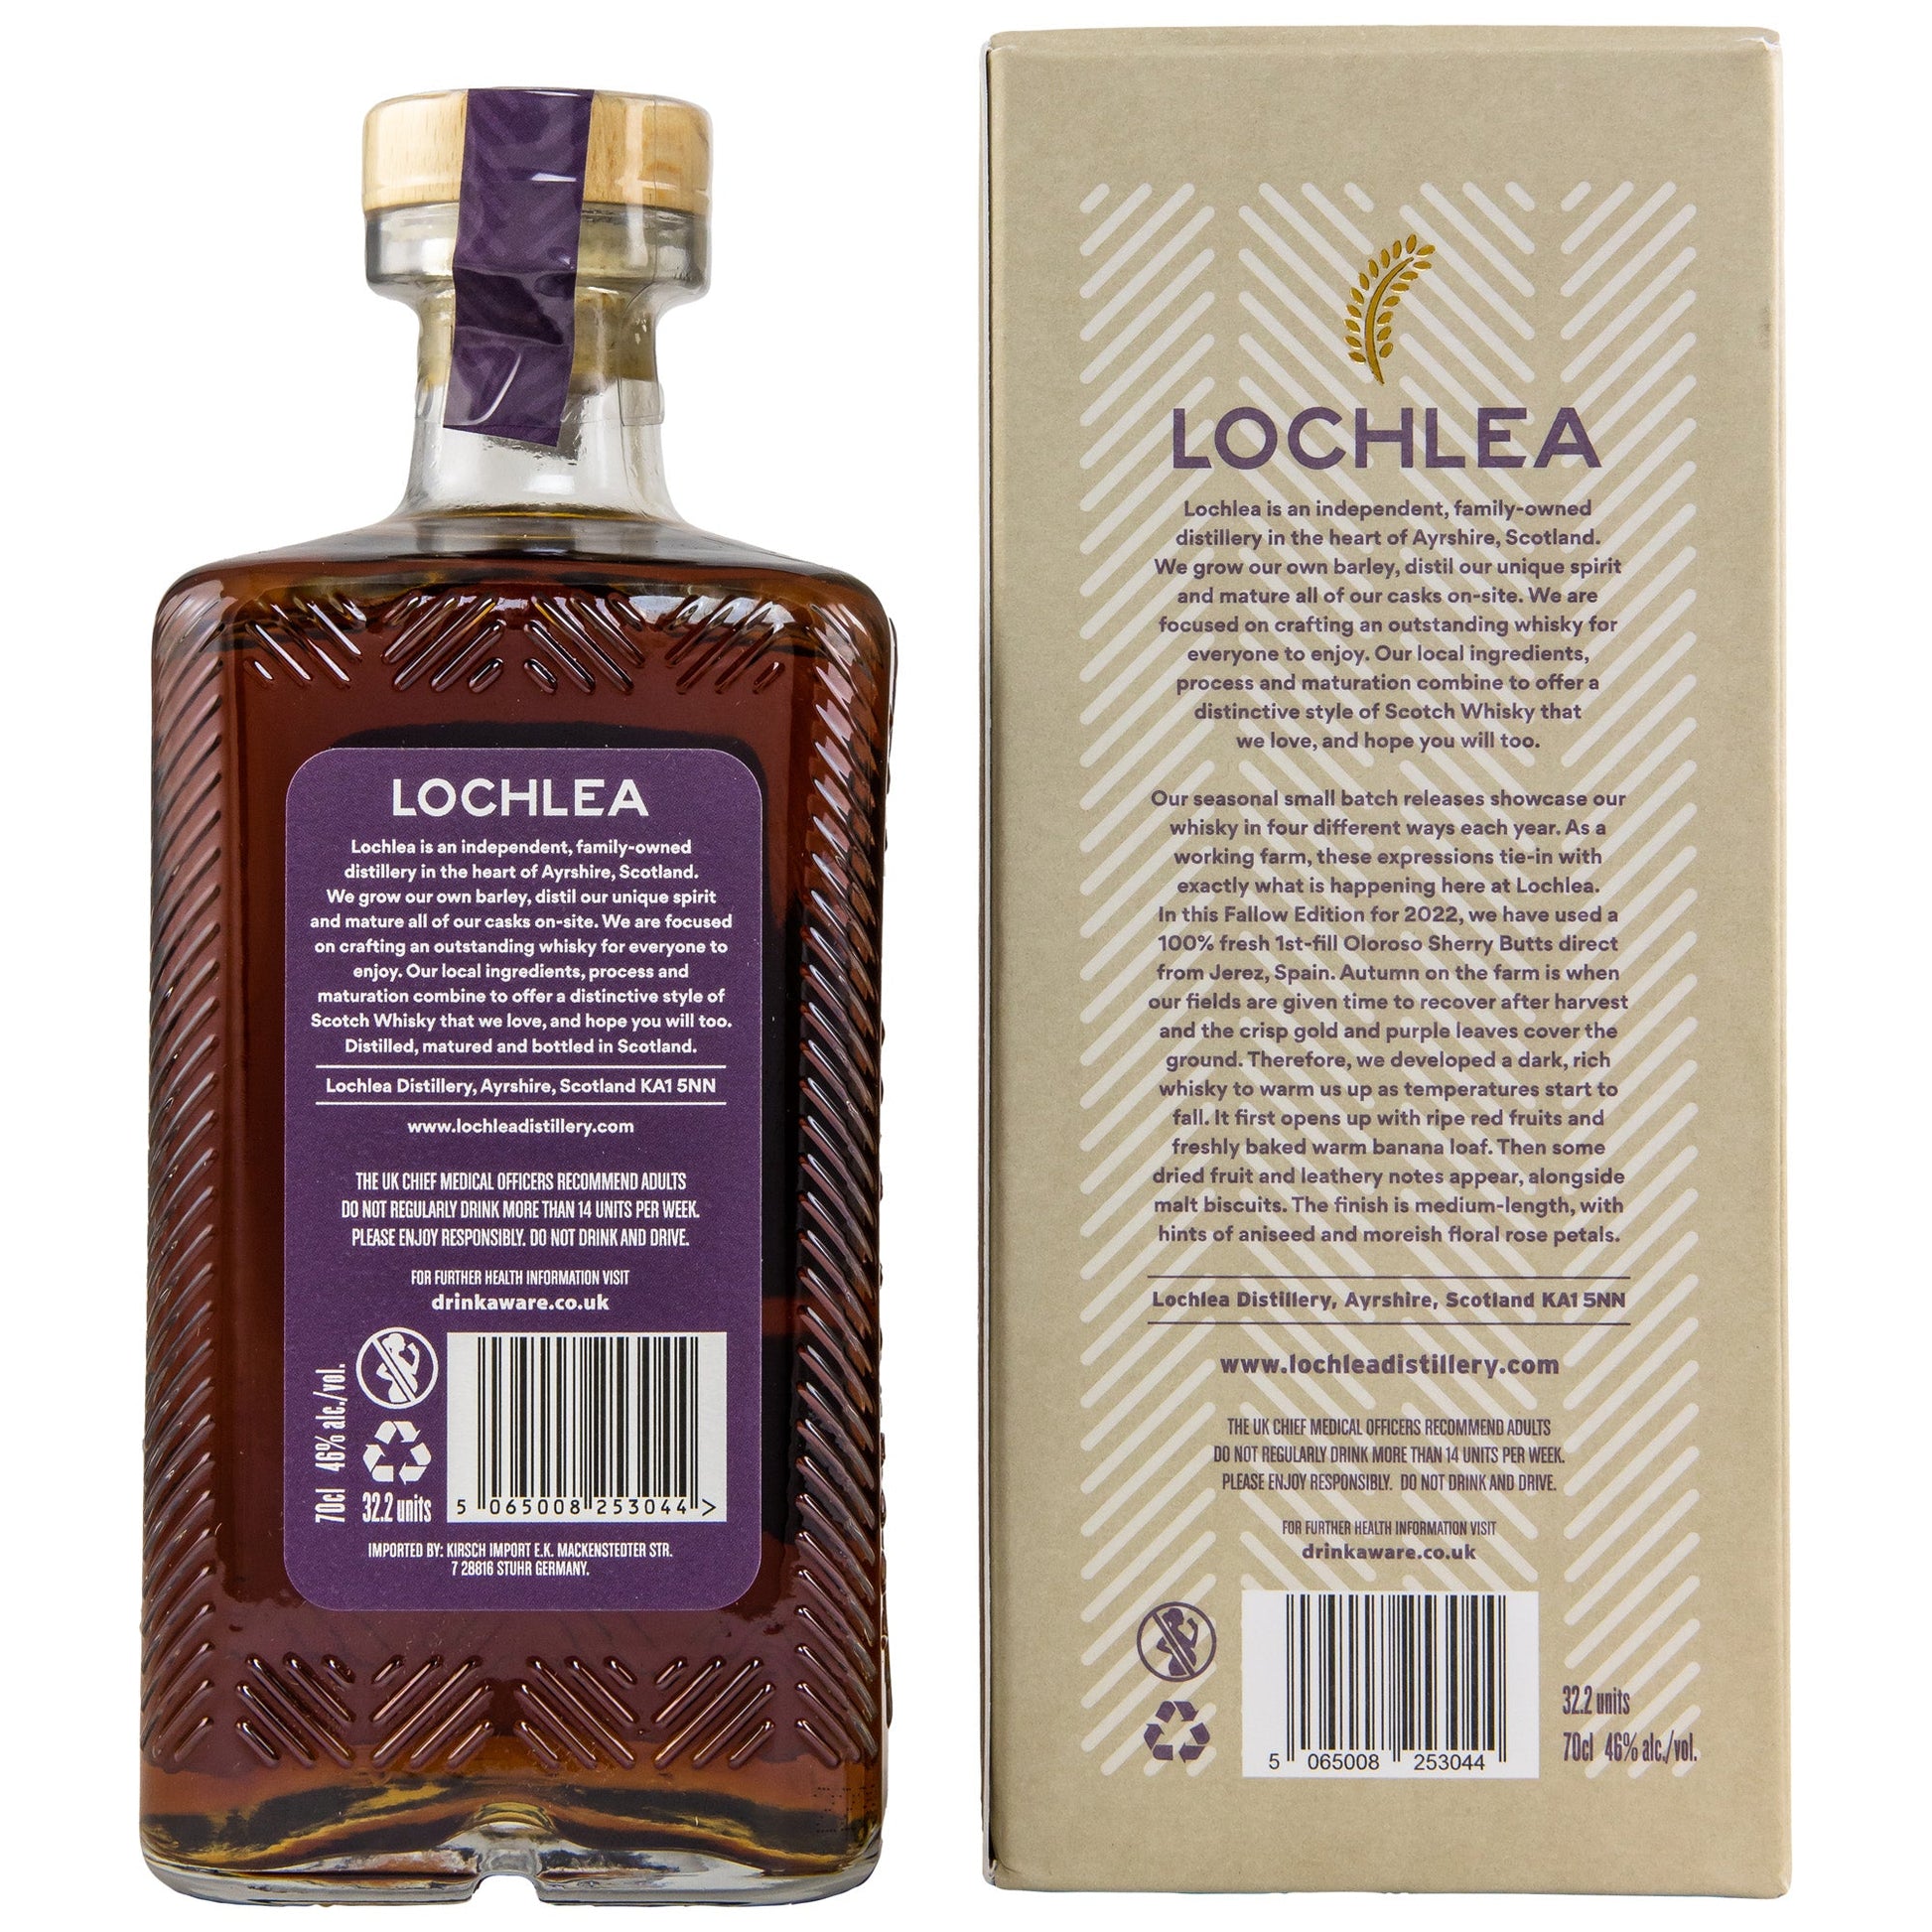 Lochlea | Fallow Edition (First Crop) | 0,7l | 46%GET A BOTTLE